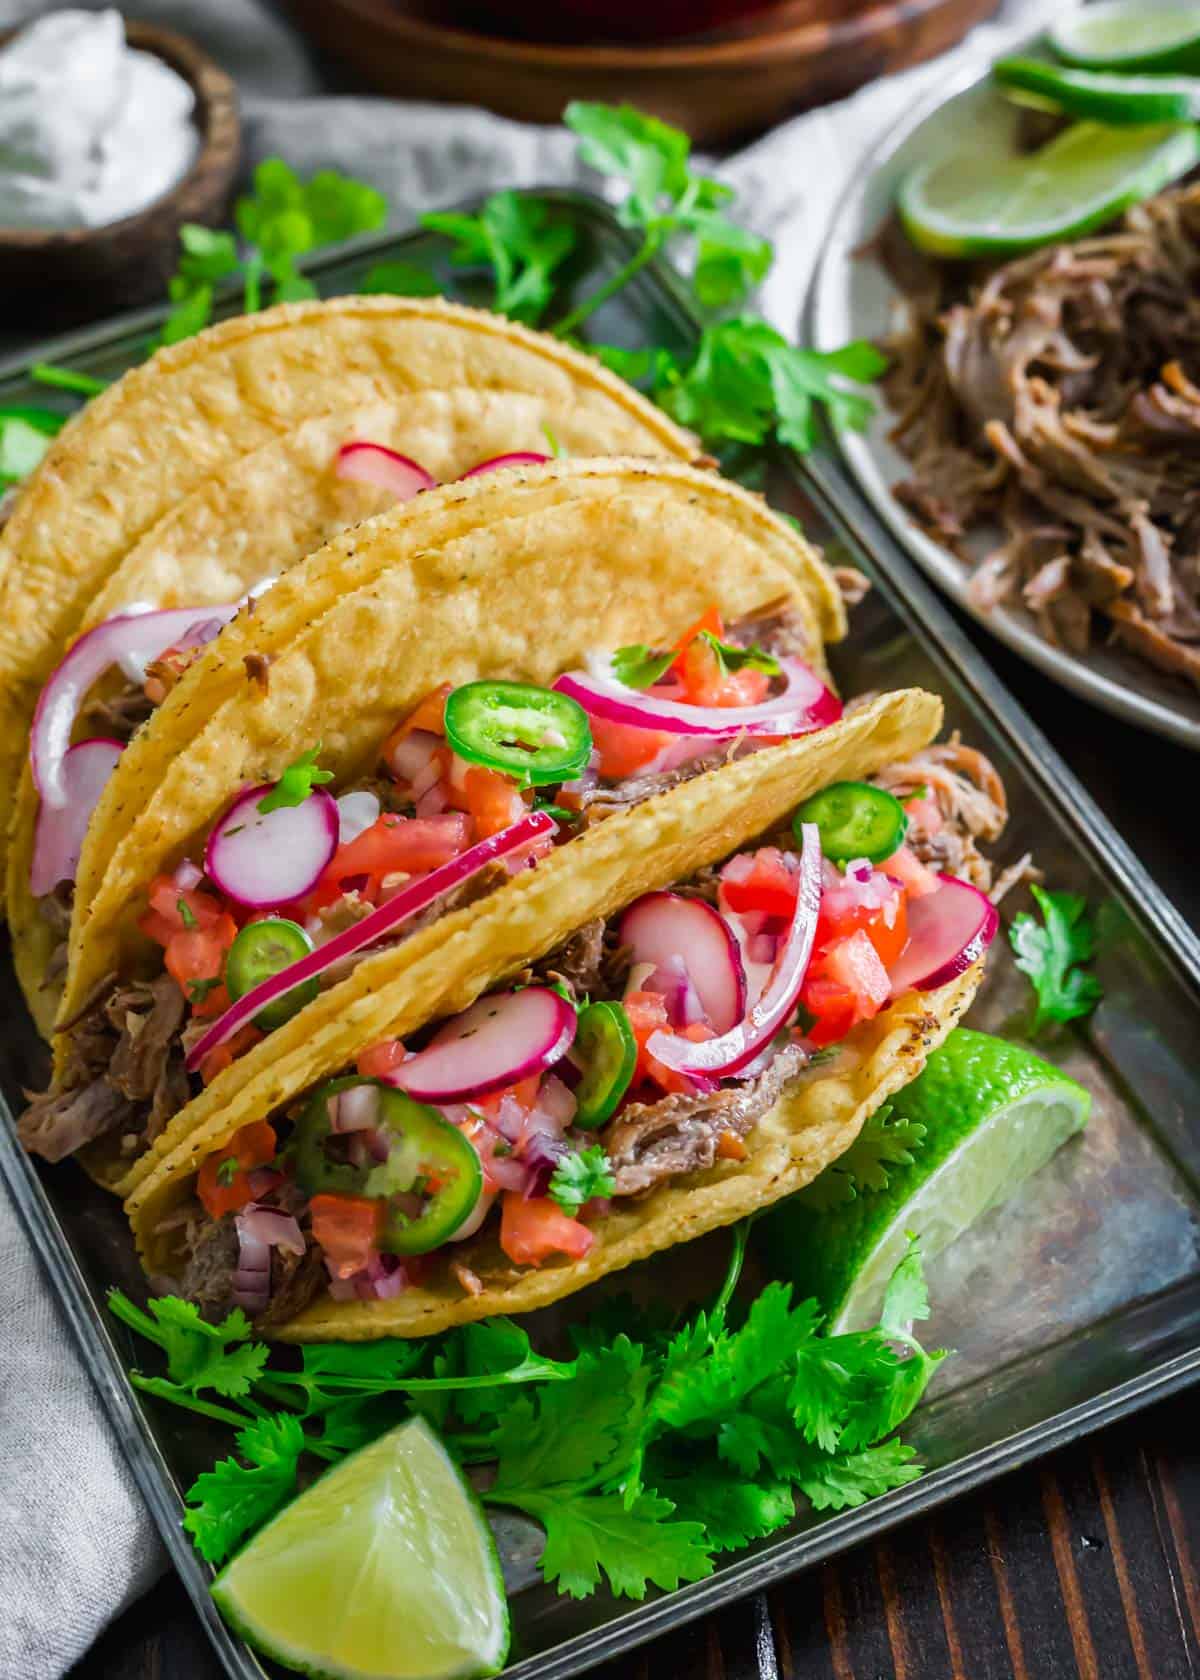 Lamb taco recipe with jalapenos, pickled radishes and red onions and fresh cilantro.